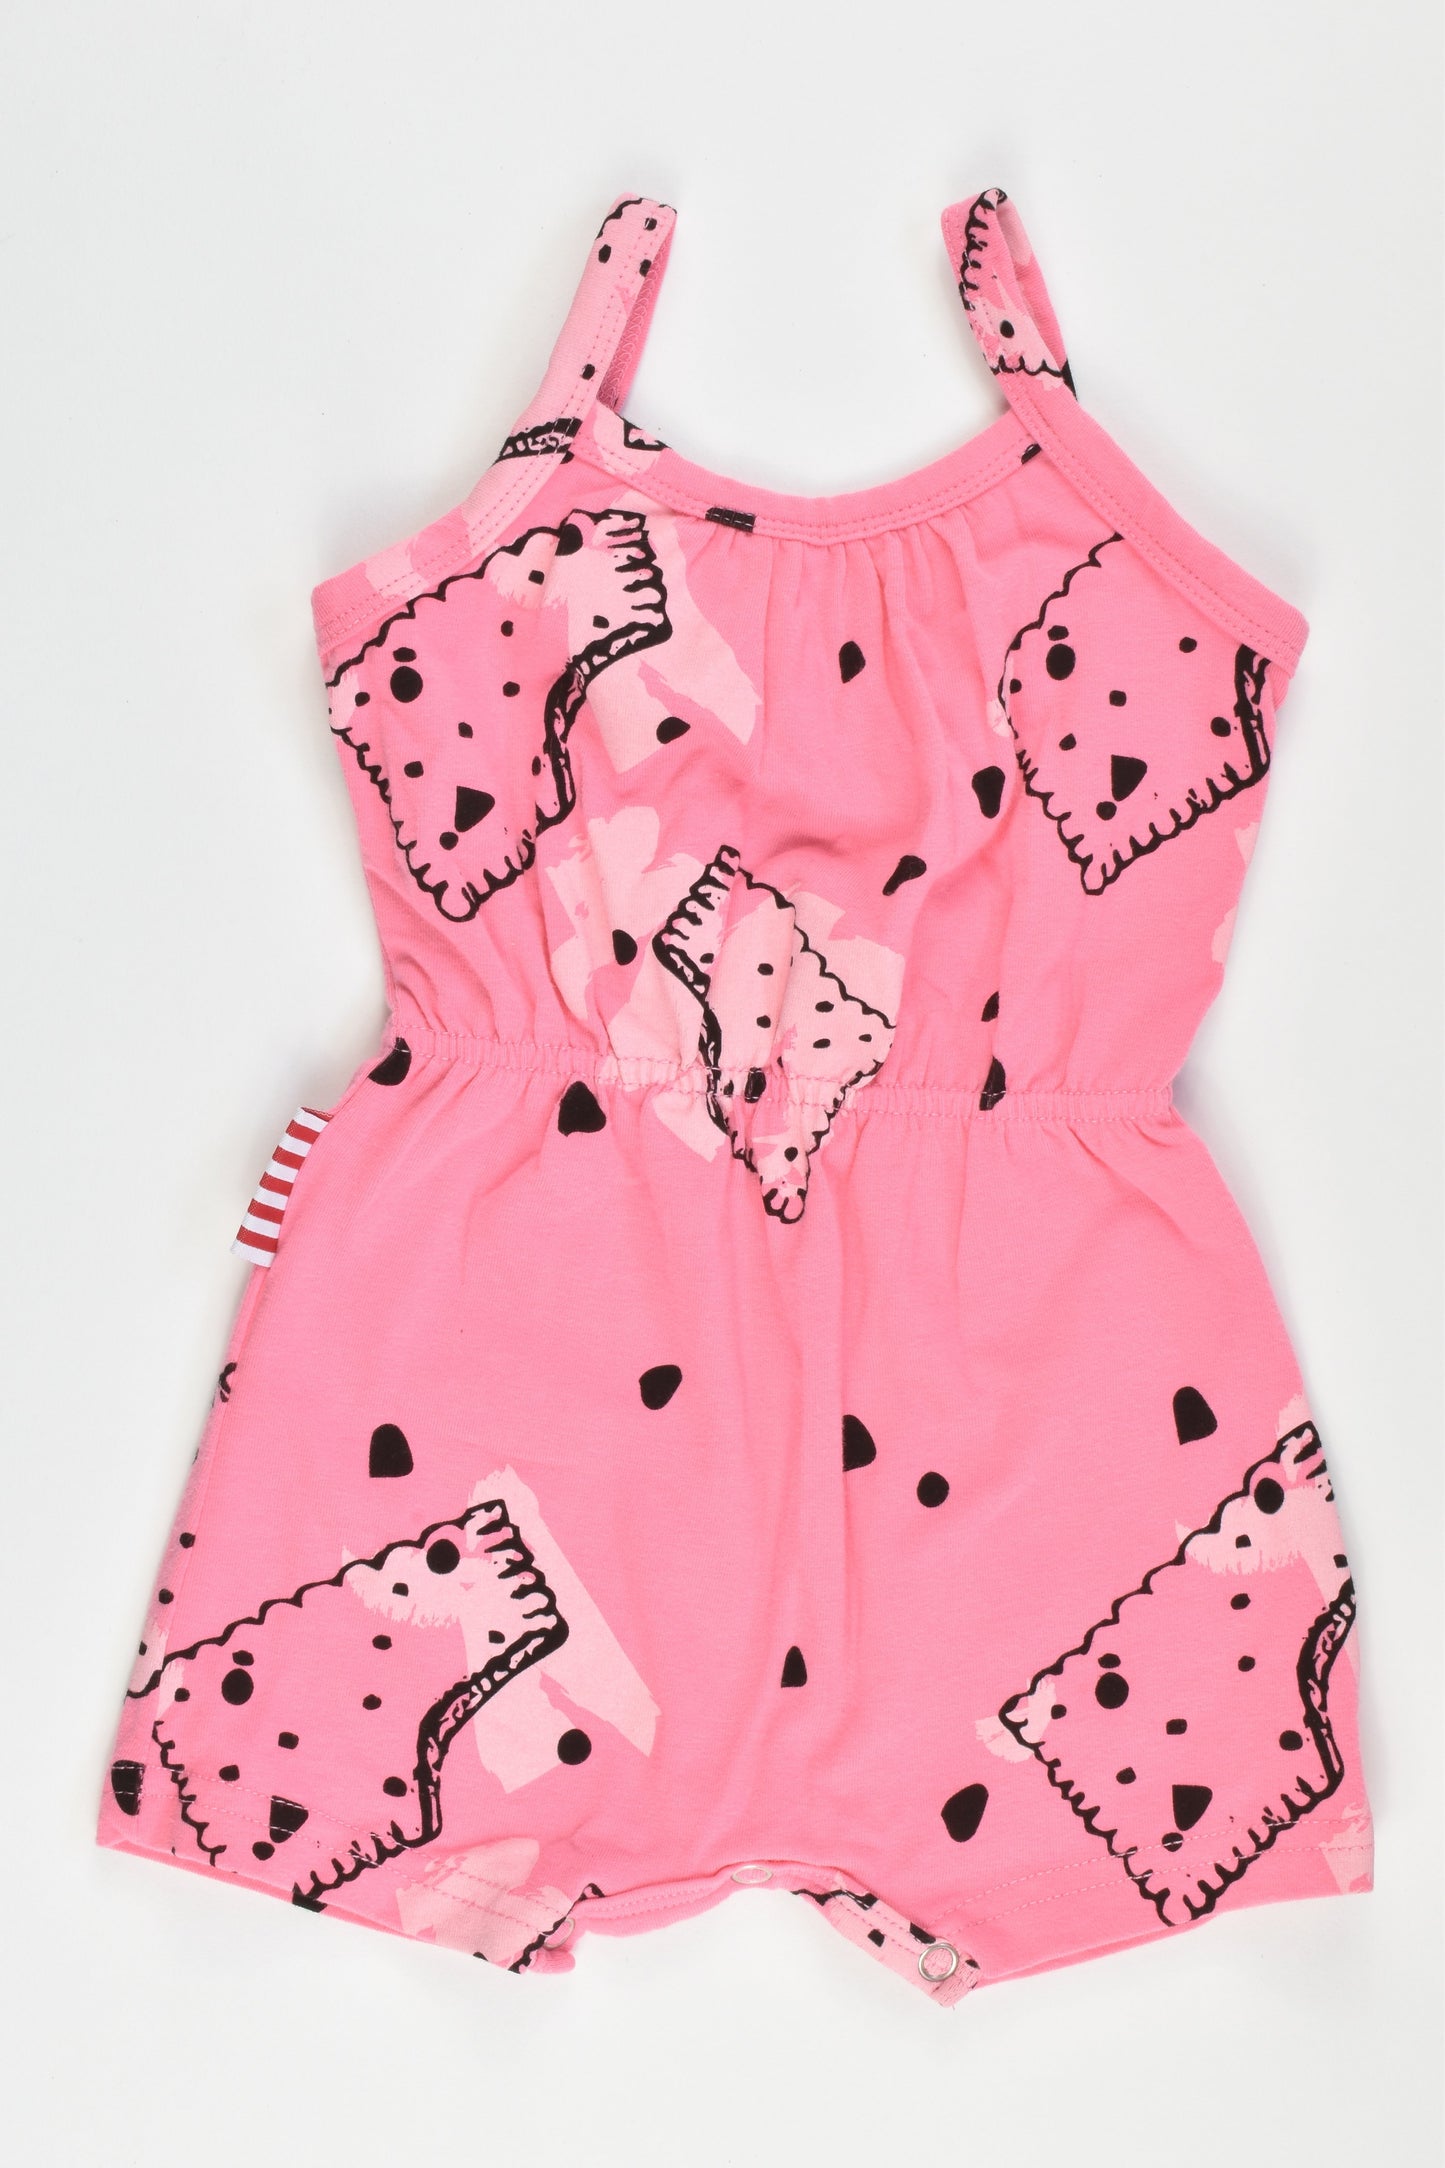 SOOKIbaby Size 000 Playsuit